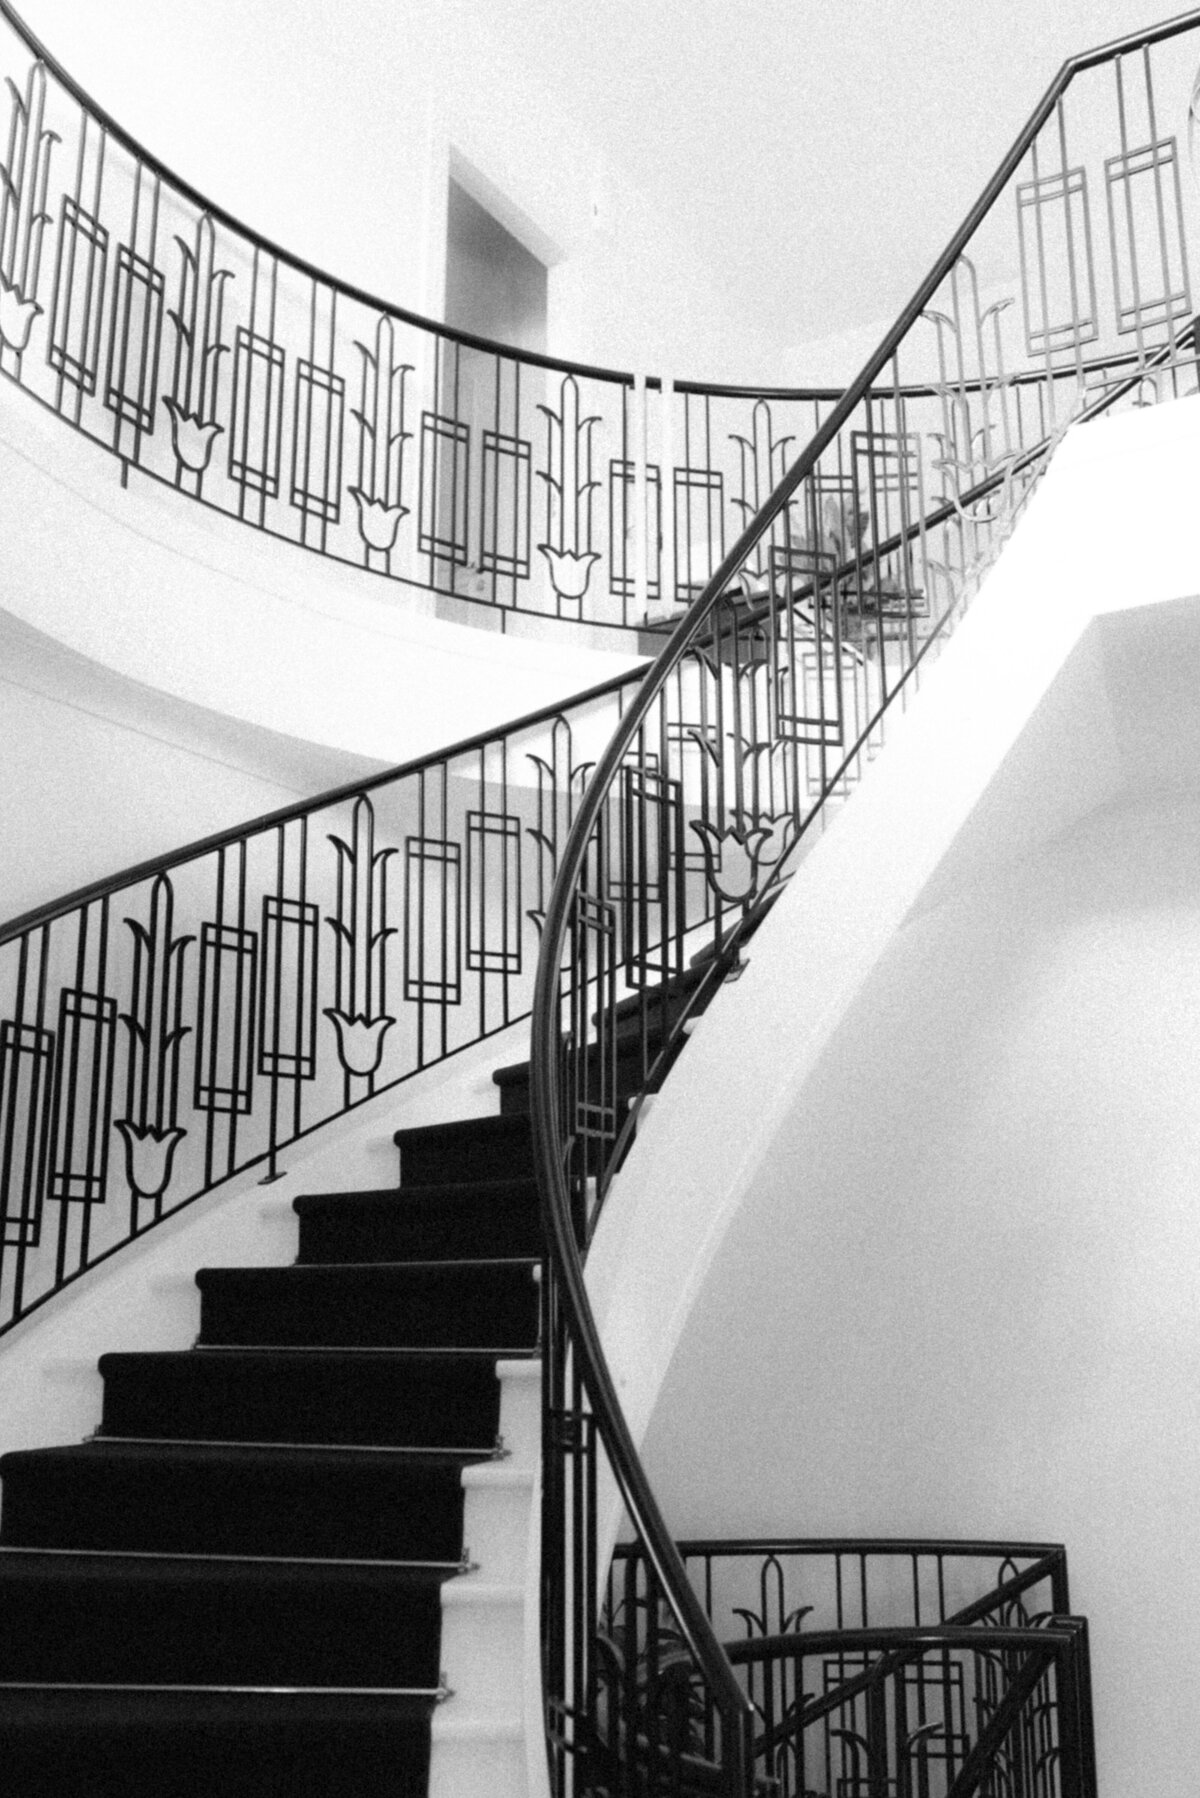 A staircase photographed by wedding photographer Hannika Gabrielsson.